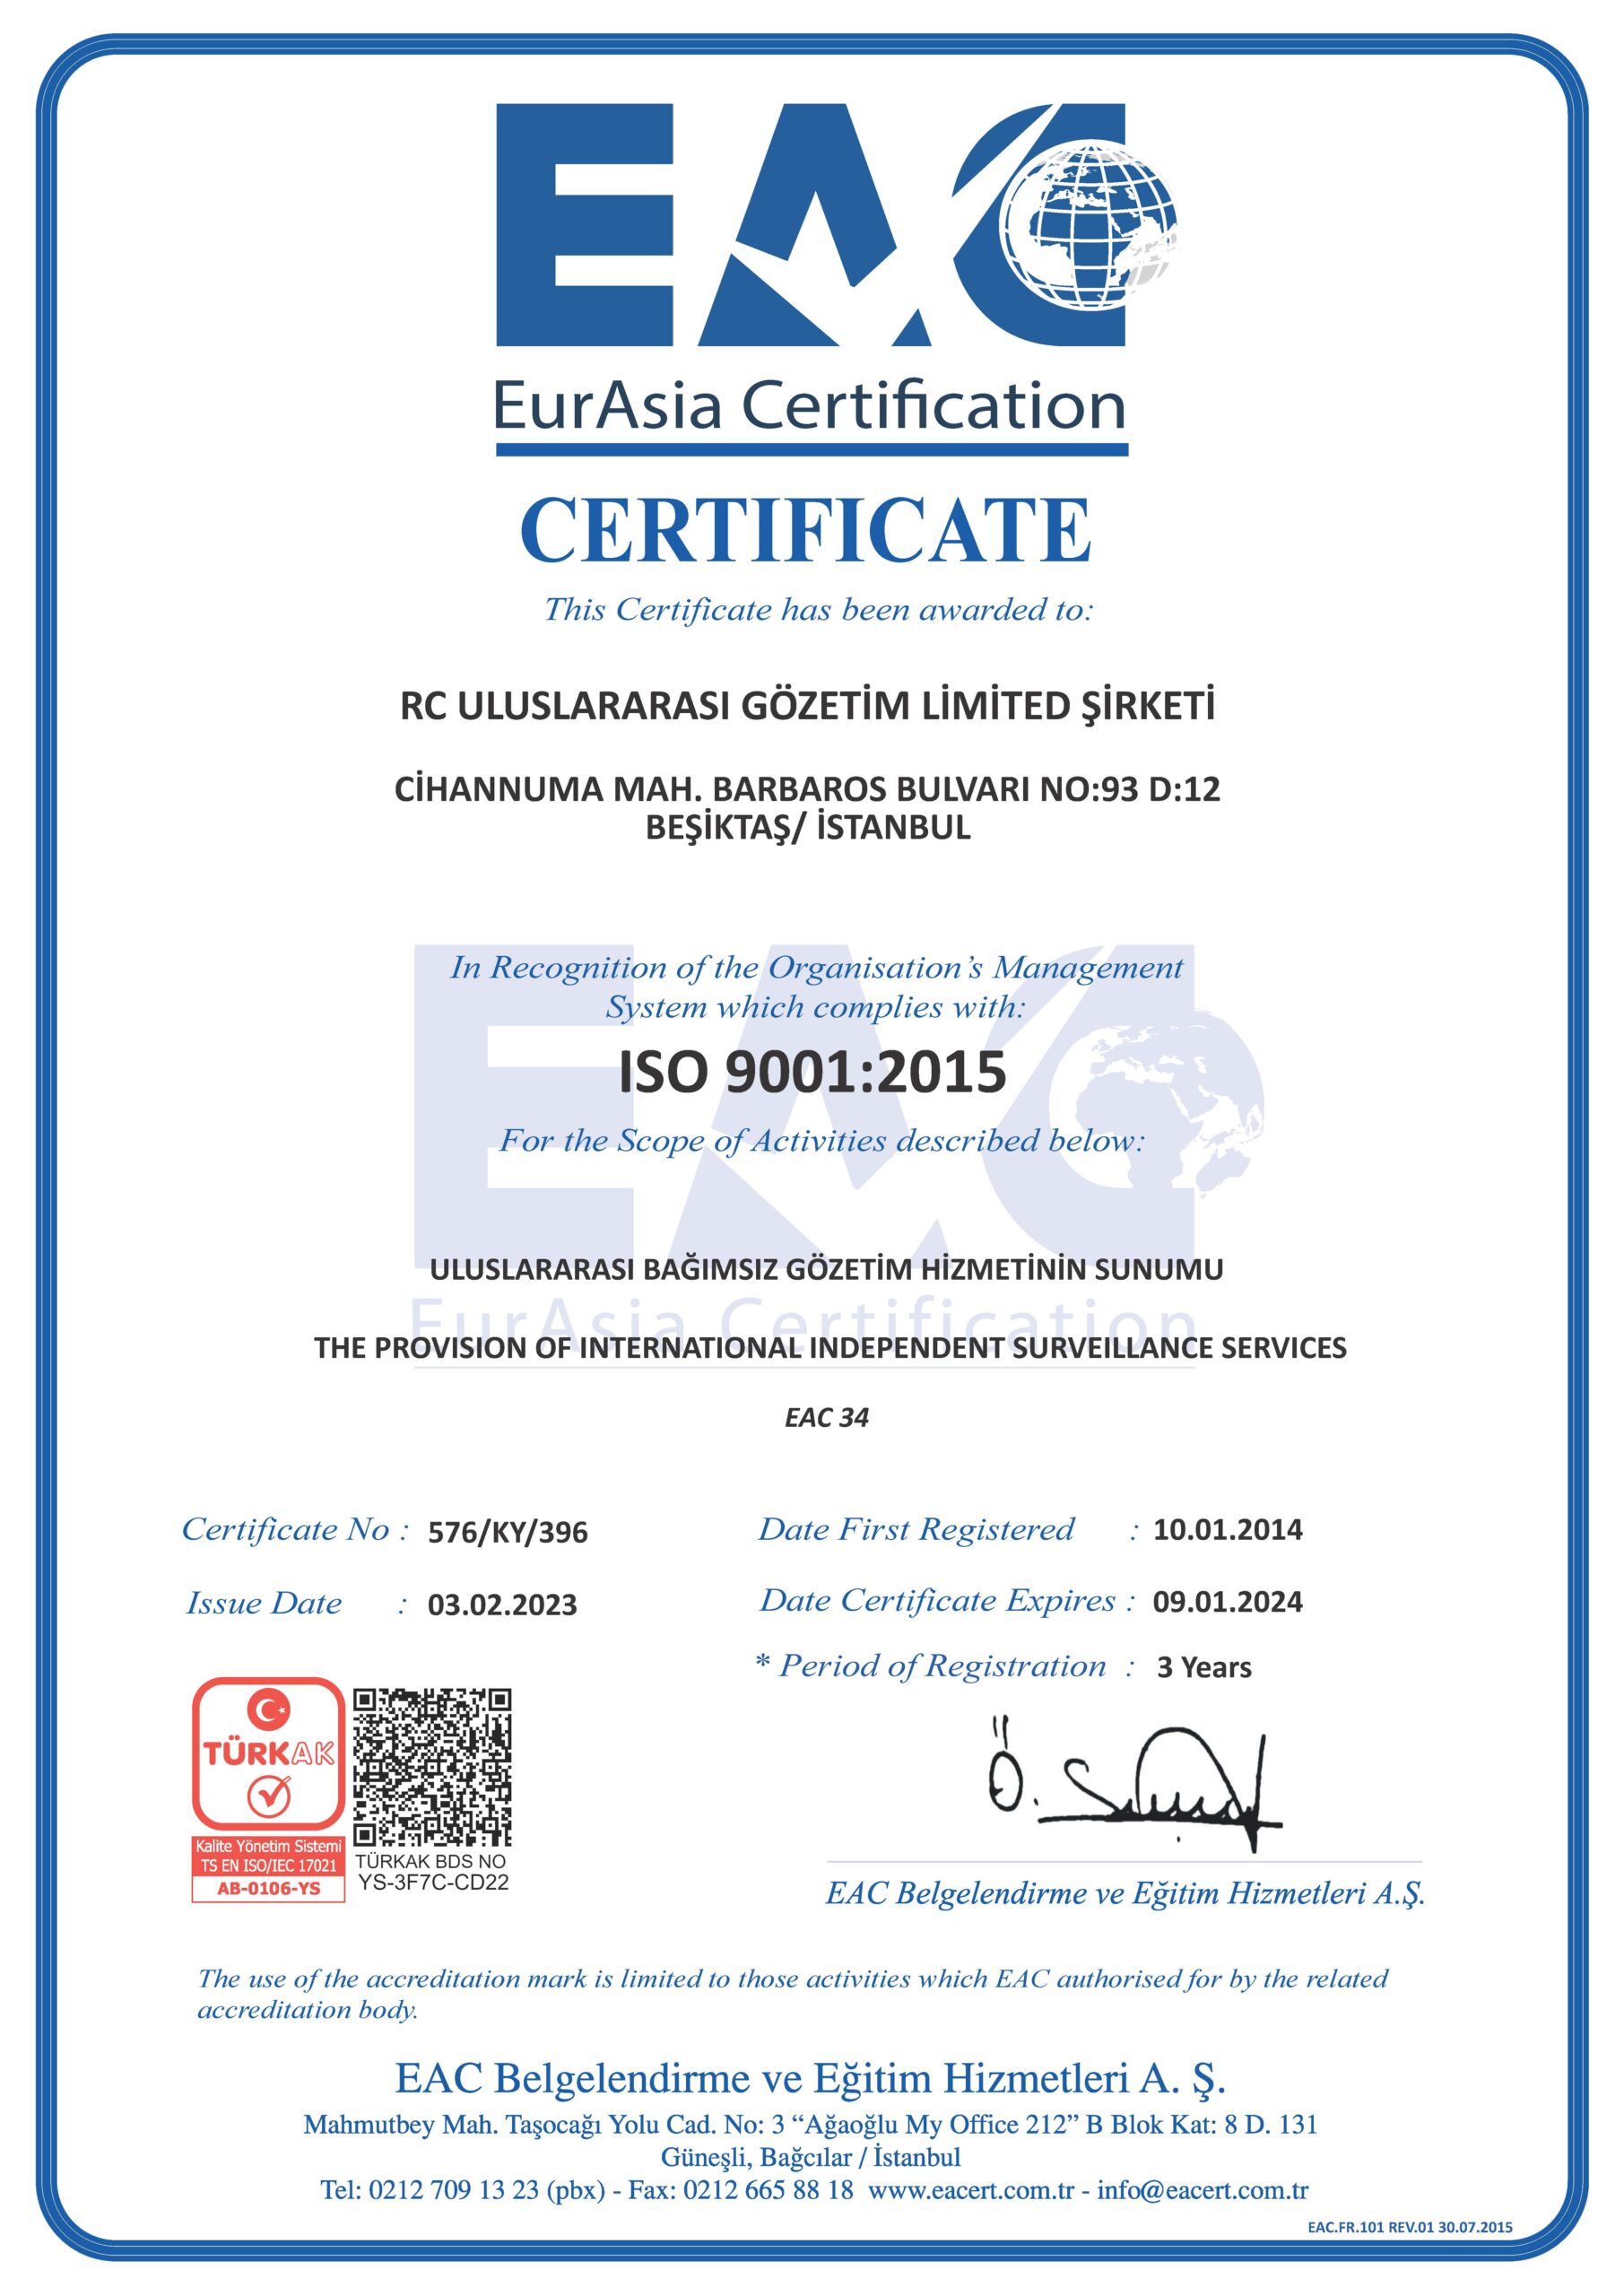 ISO 9001 CERTIFICATE